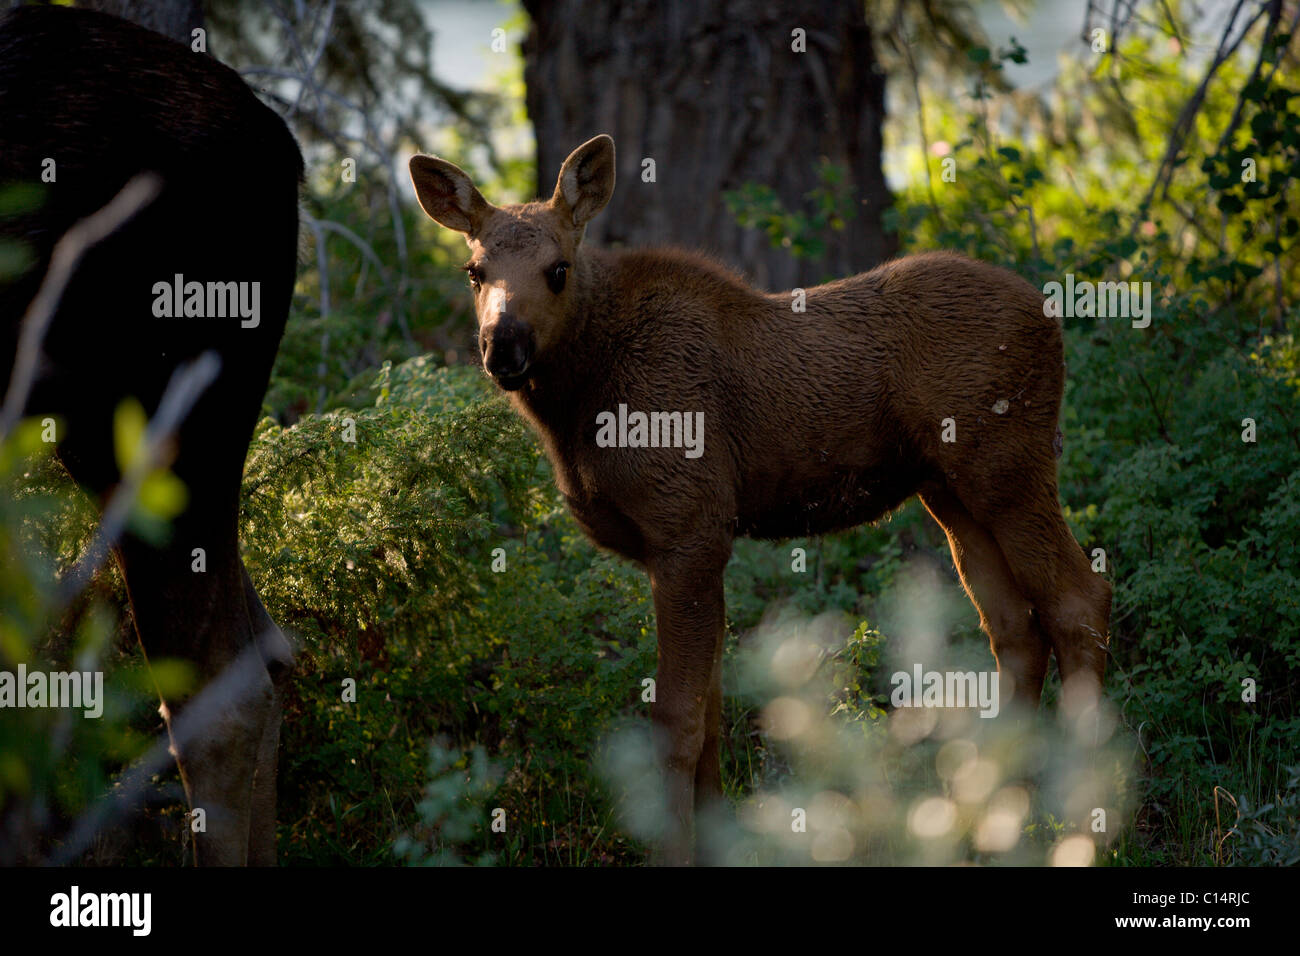 A juvenile moose stands behind its mother while in the woods. Stock Photo